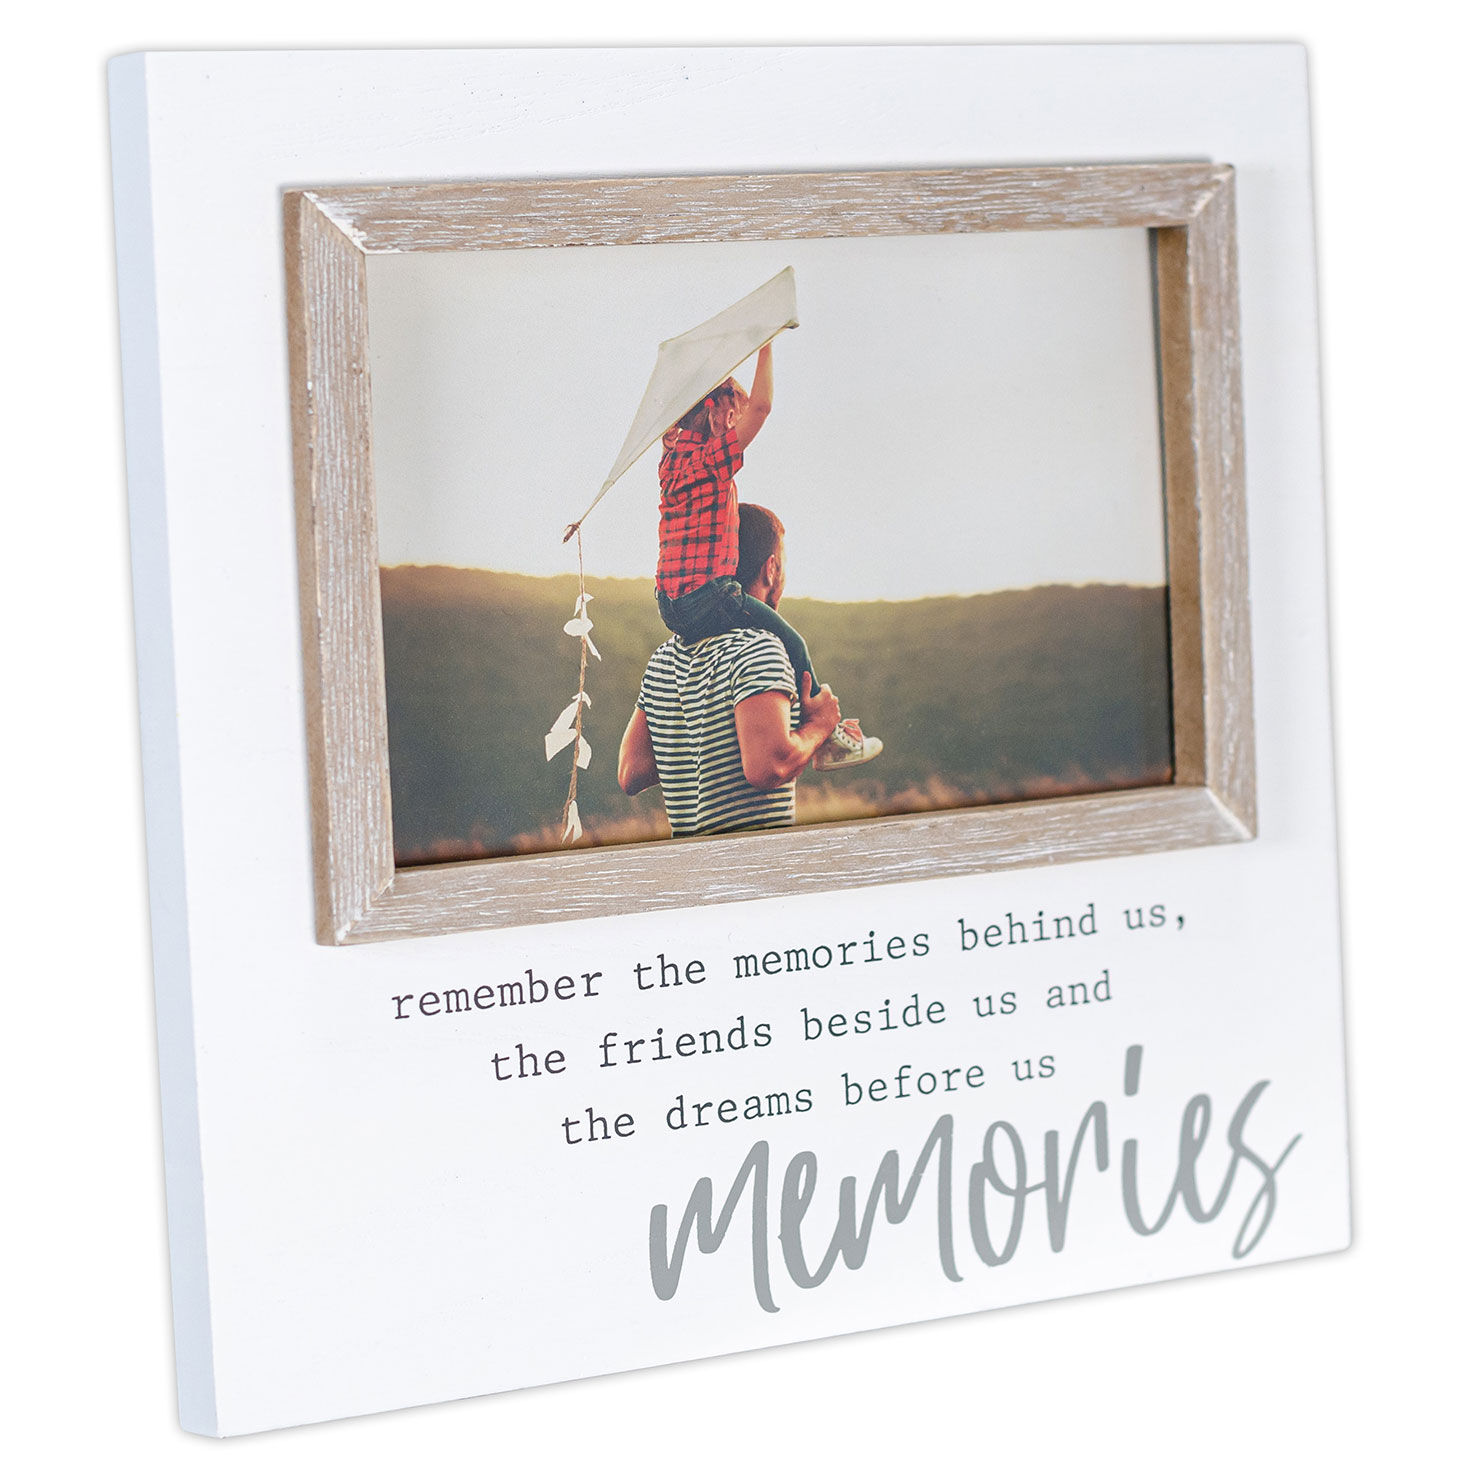 https://www.hallmark.com/dw/image/v2/AALB_PRD/on/demandware.static/-/Sites-hallmark-master/default/dw19b6199f/images/finished-goods/products/1029246/Remember-the-Memories-White-Wood-Picture-Frame_1029246_01.jpg?sfrm=jpg